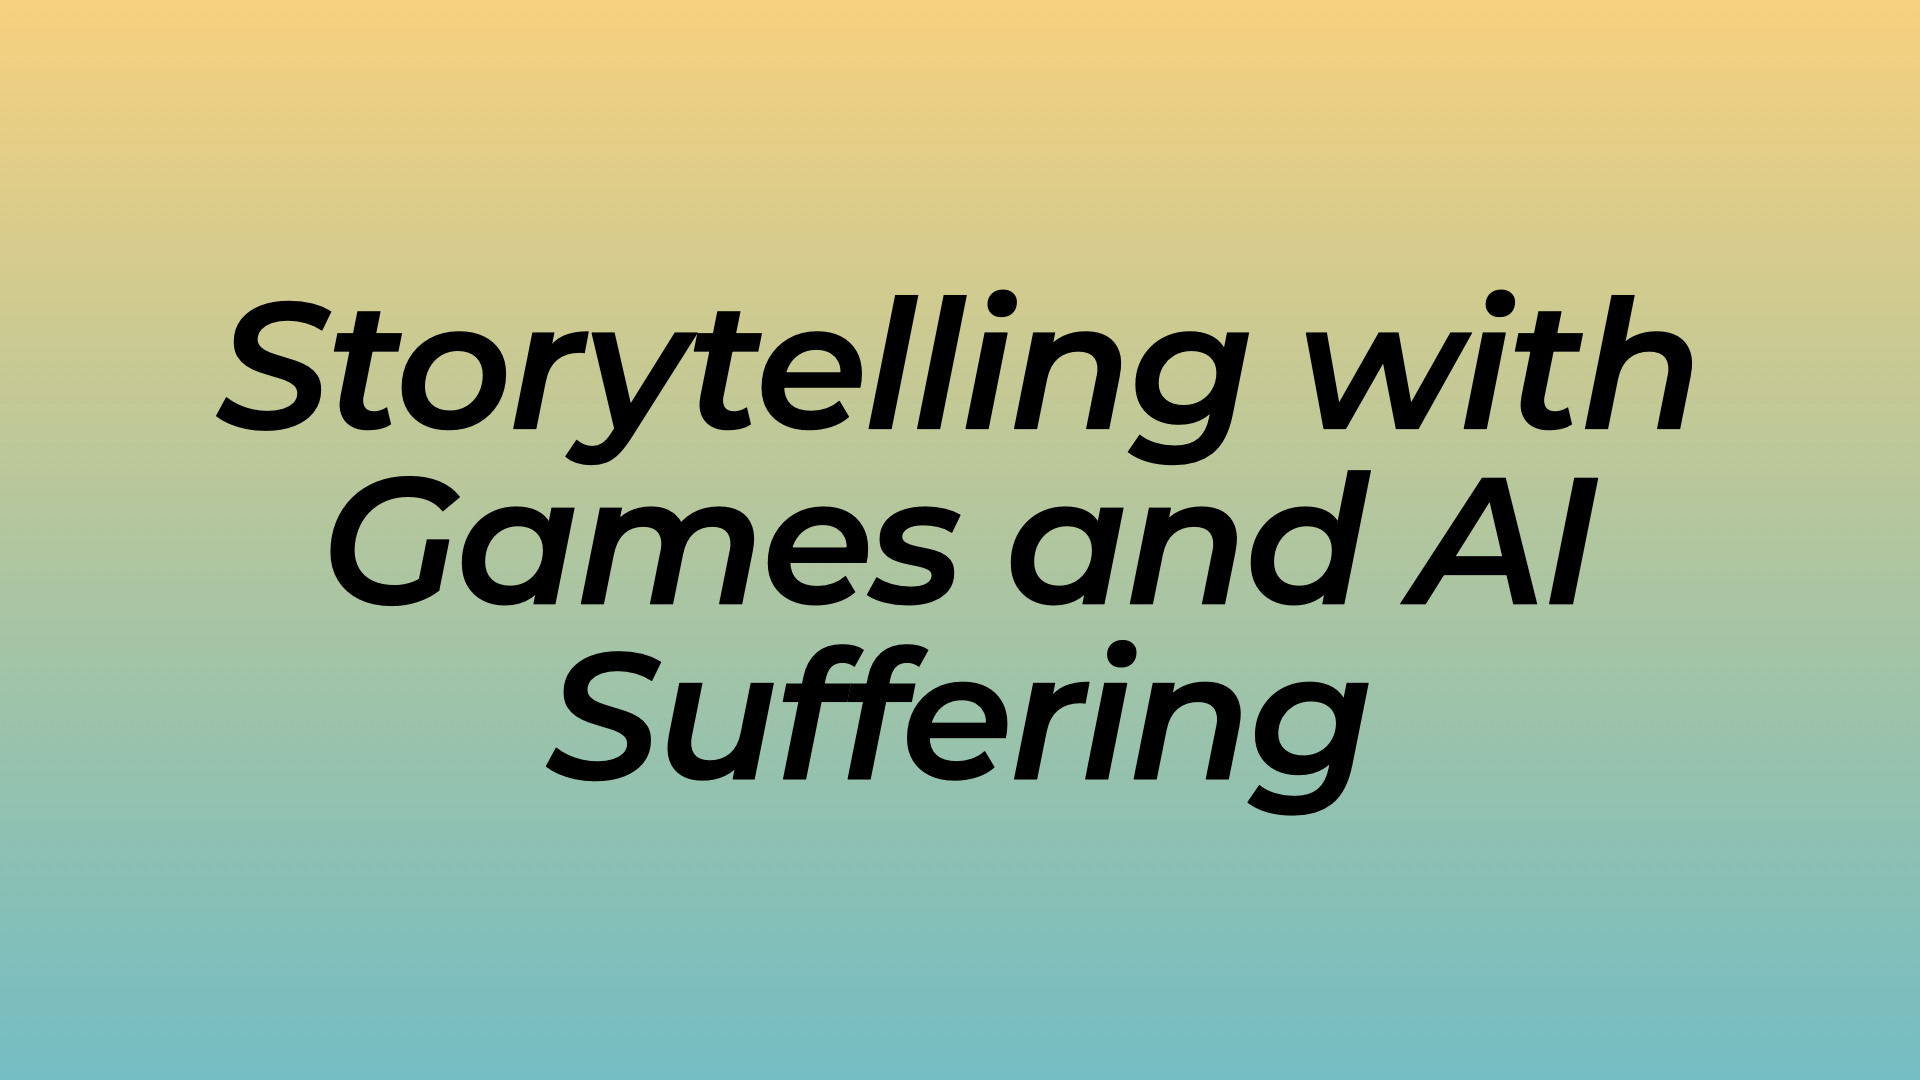 Storytelling with Games and AI Suffering